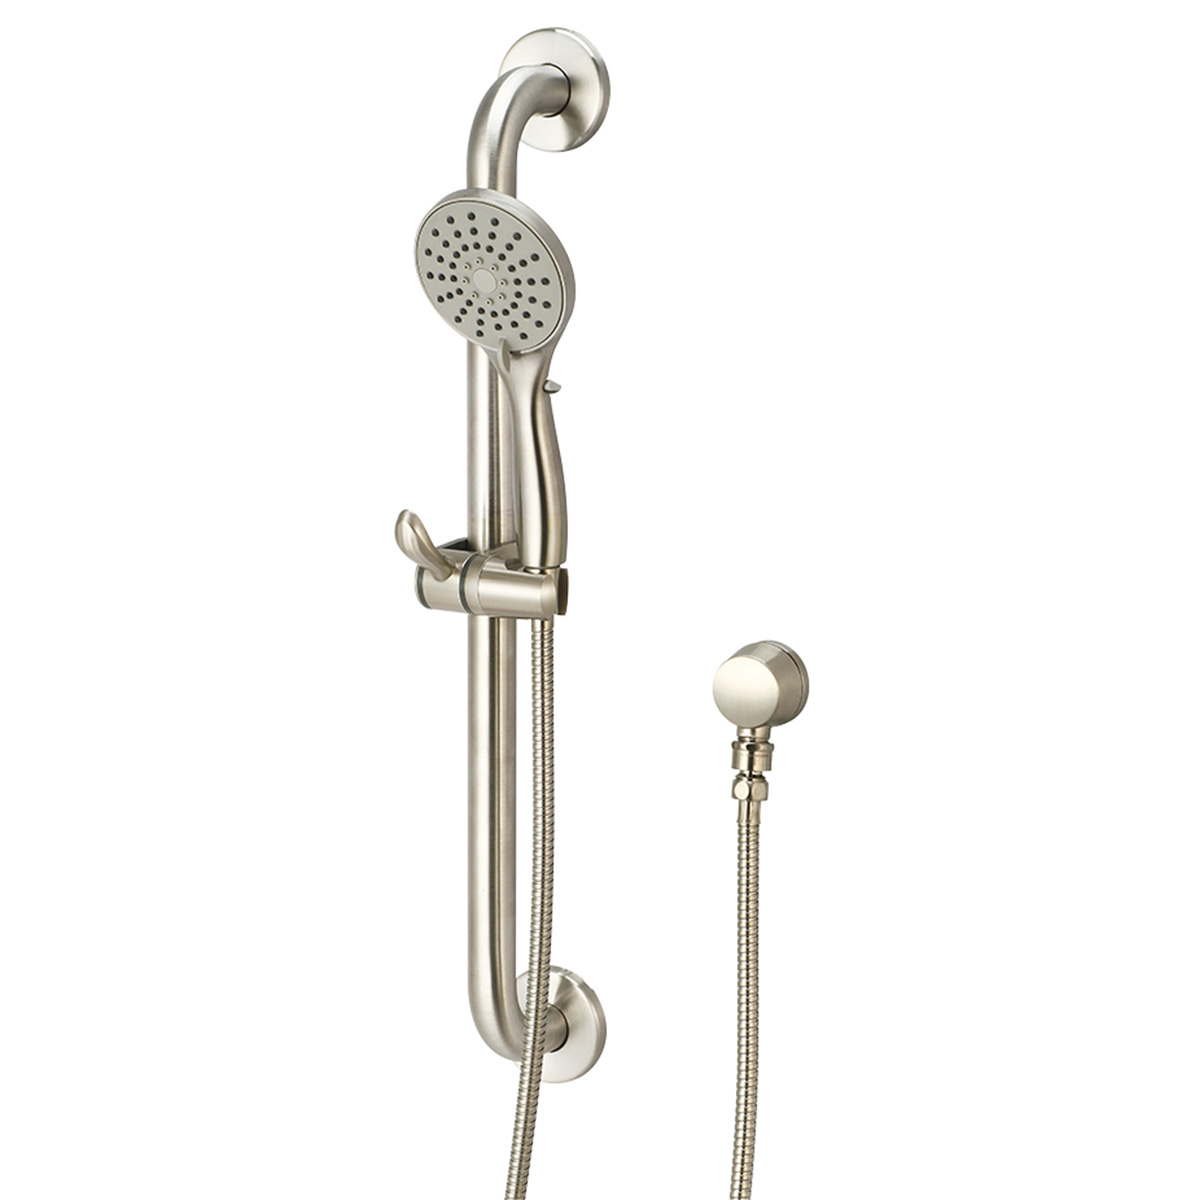 Picture of Accent P-4440-BN Handheld Shower Set - Brushed Nickel